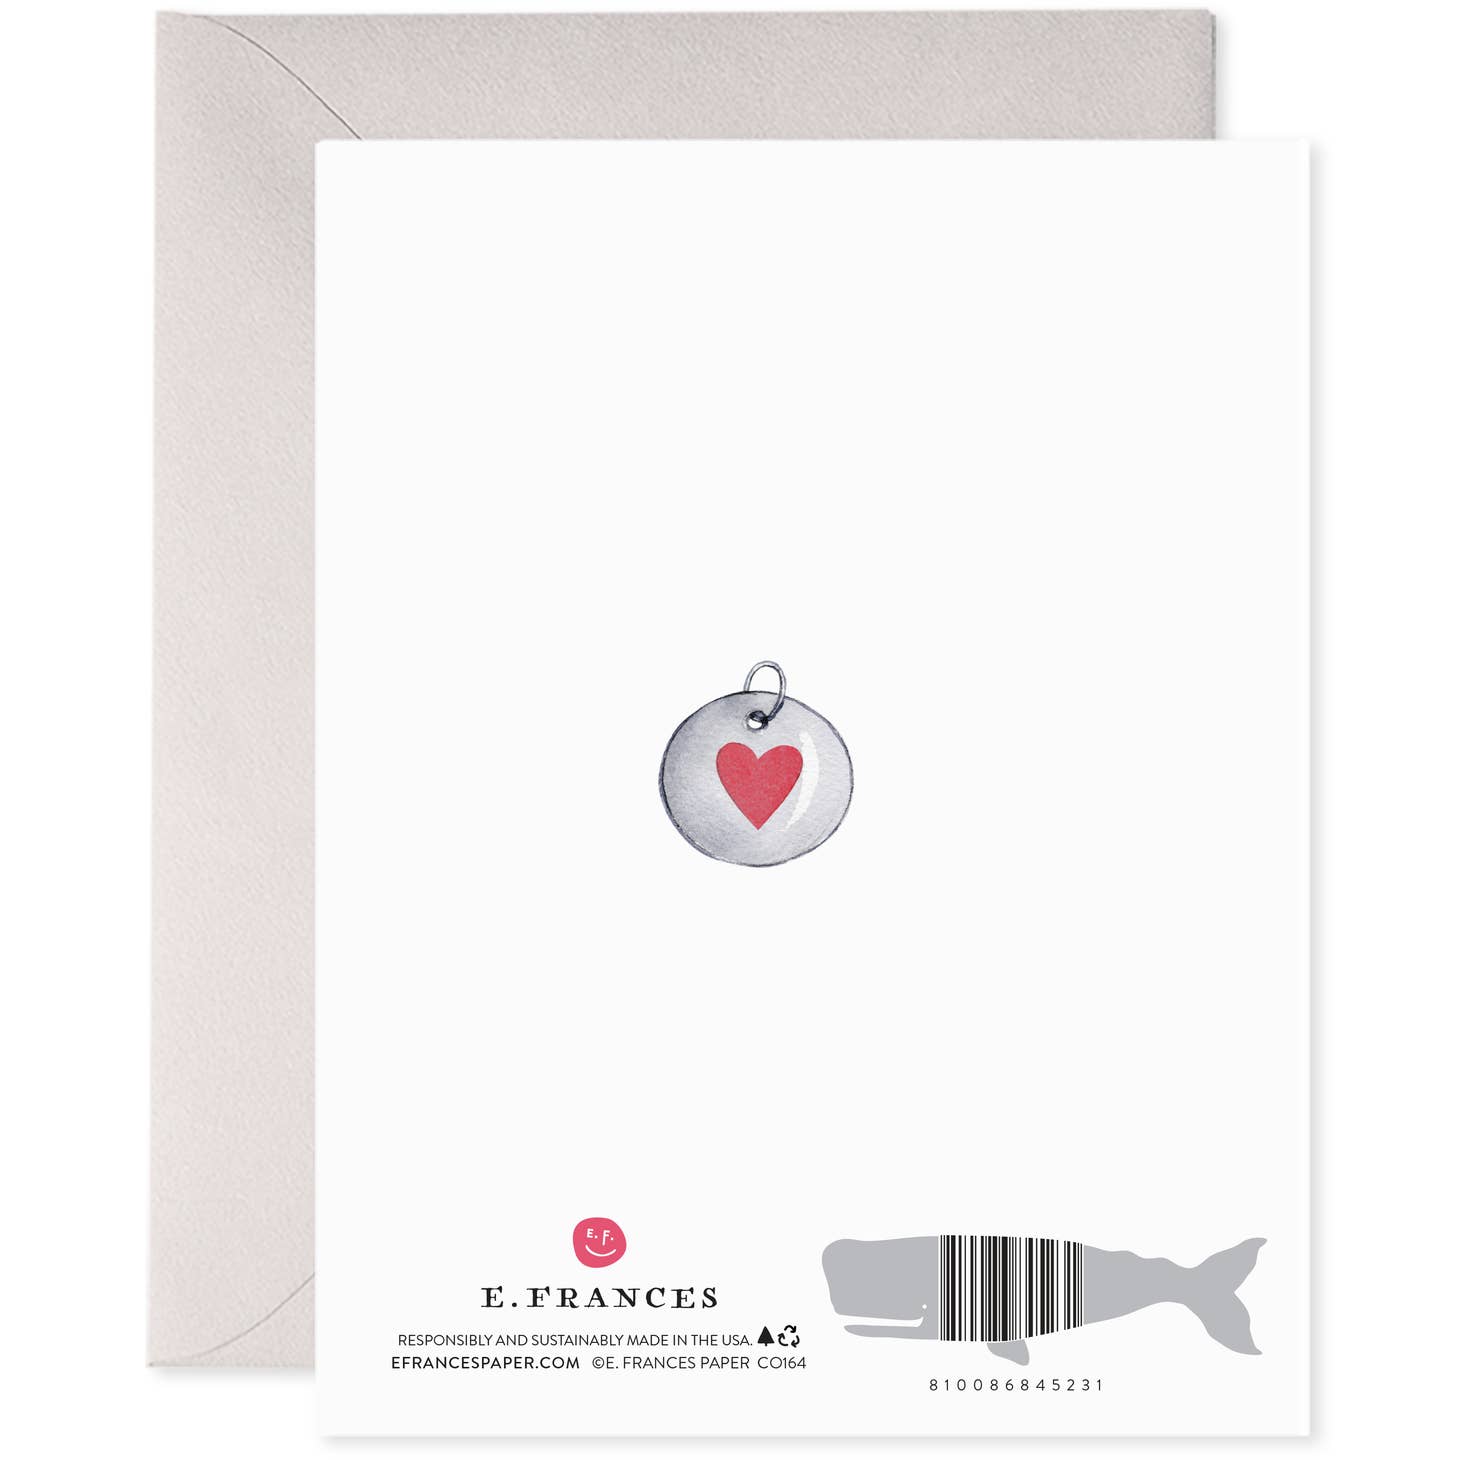 White background with image of a red heart tag. Grey envelope included.